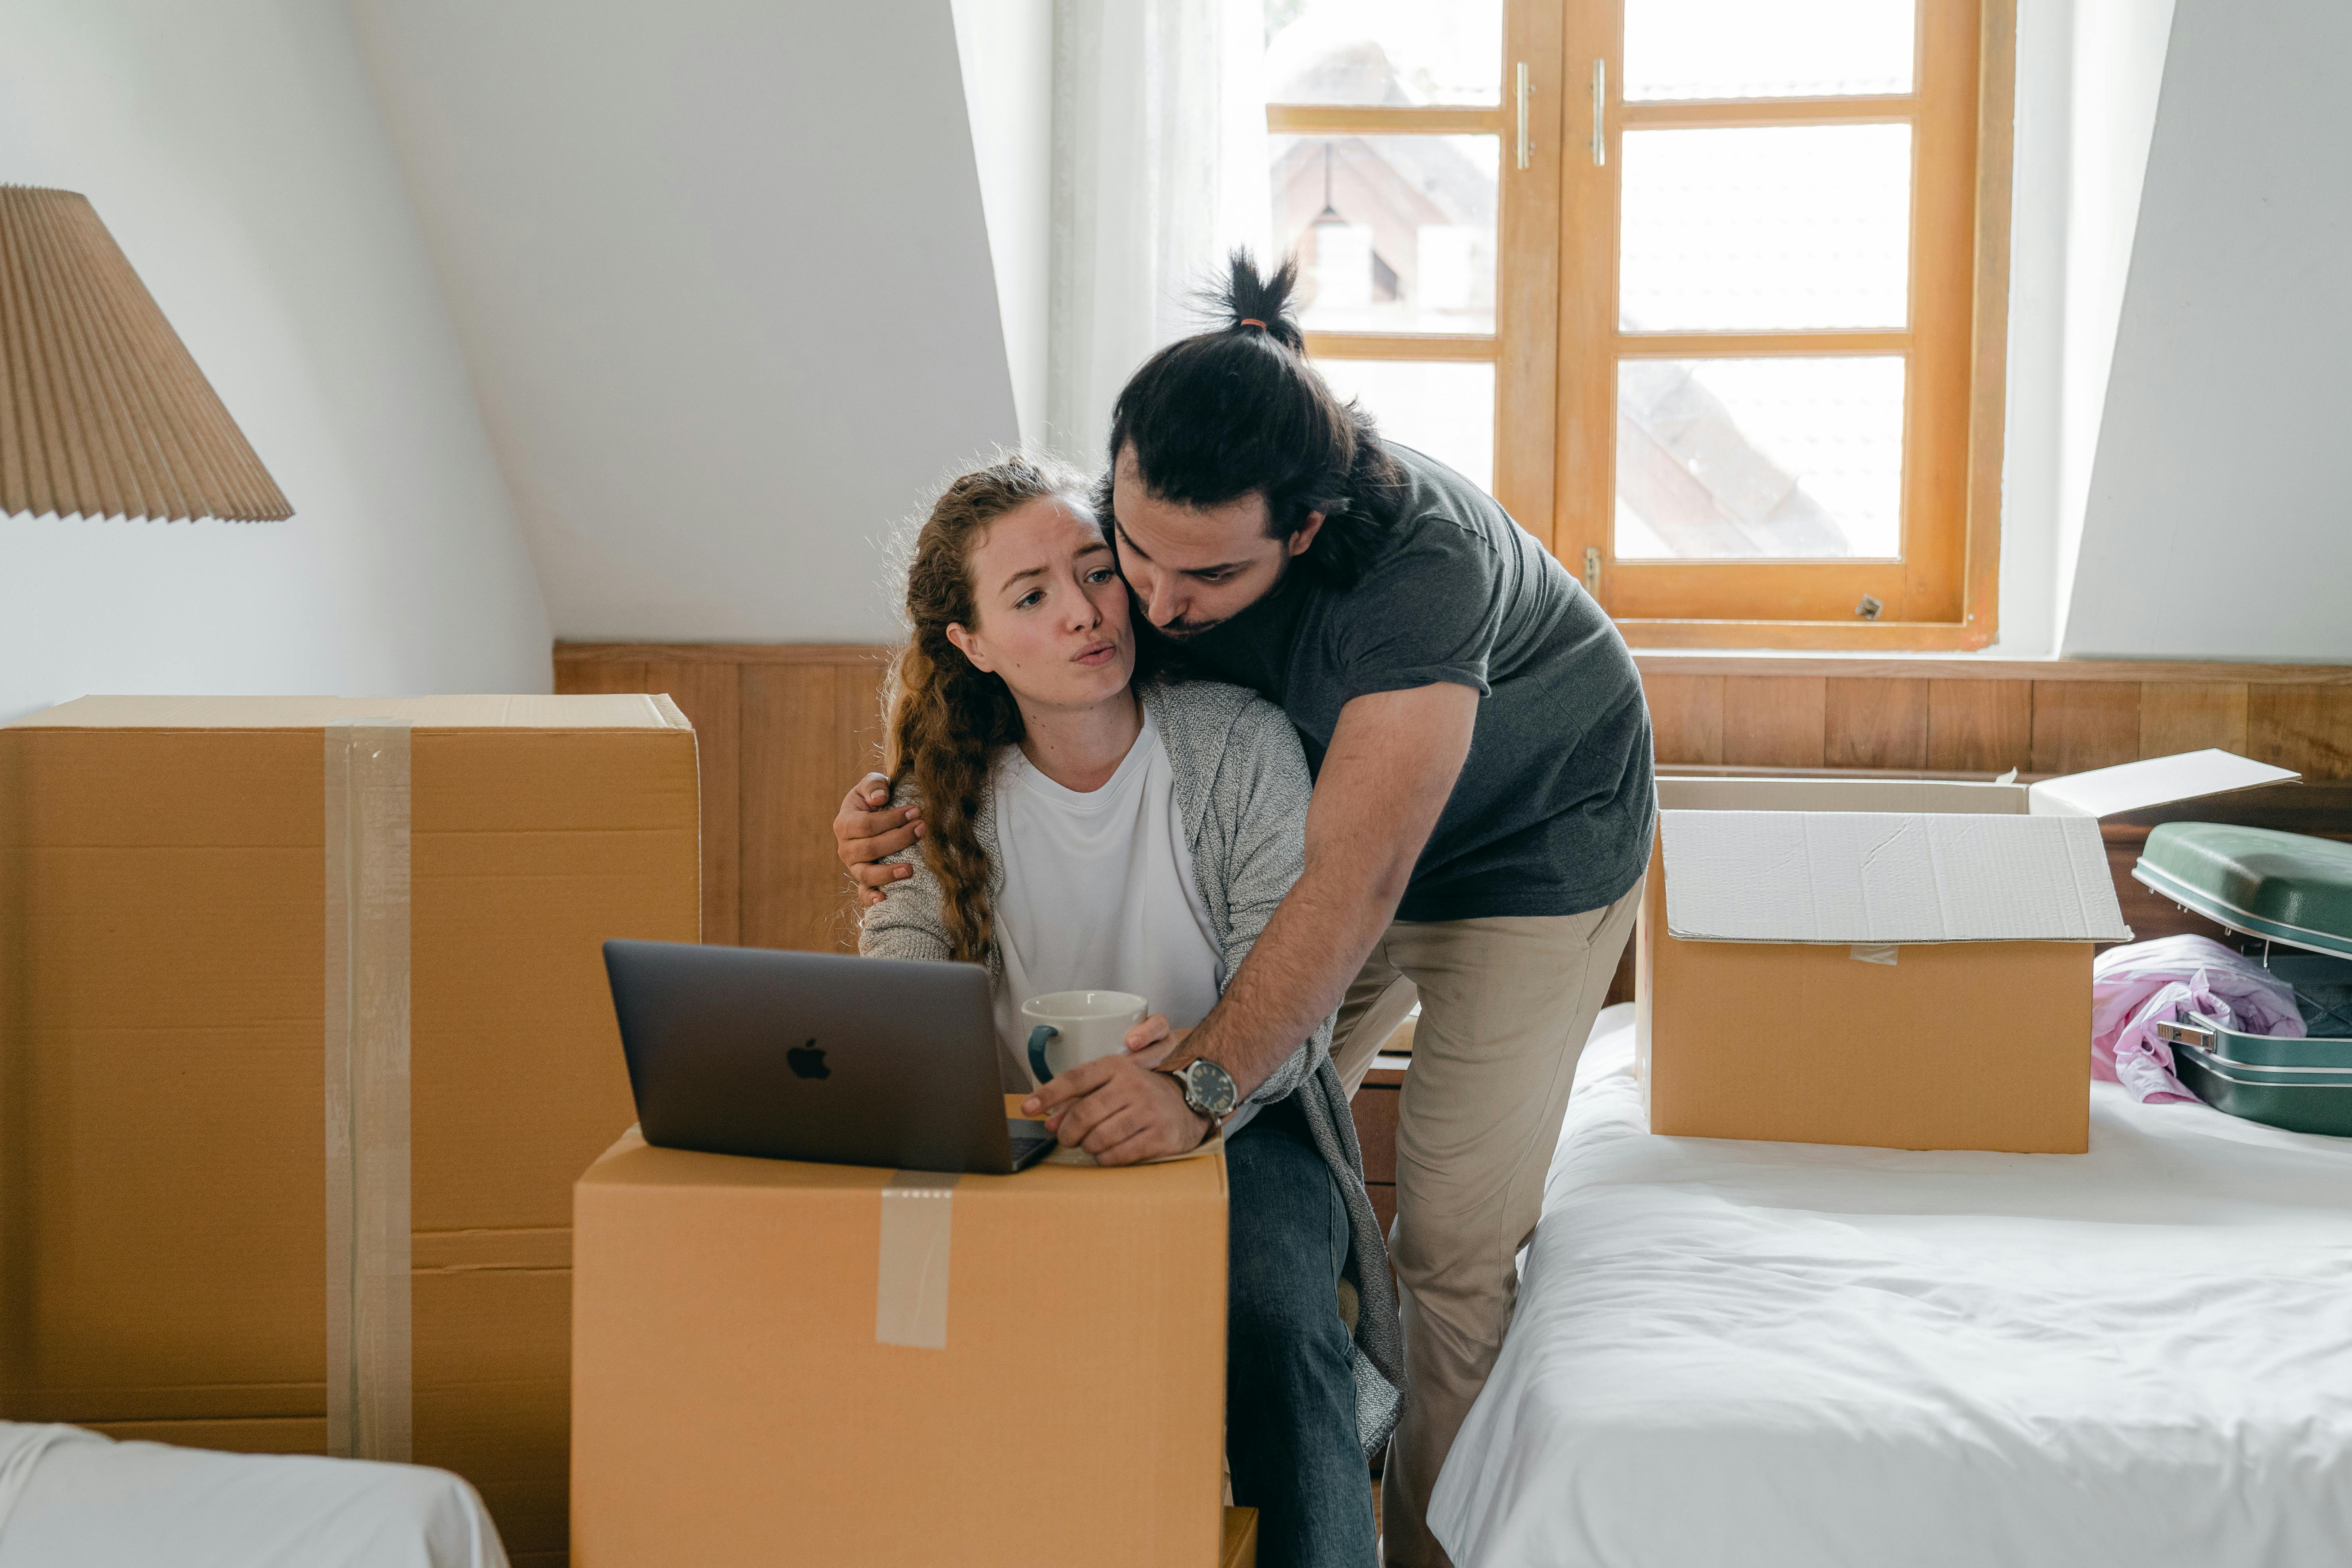 multiracial couple embracing while using laptop in attic style bedroom